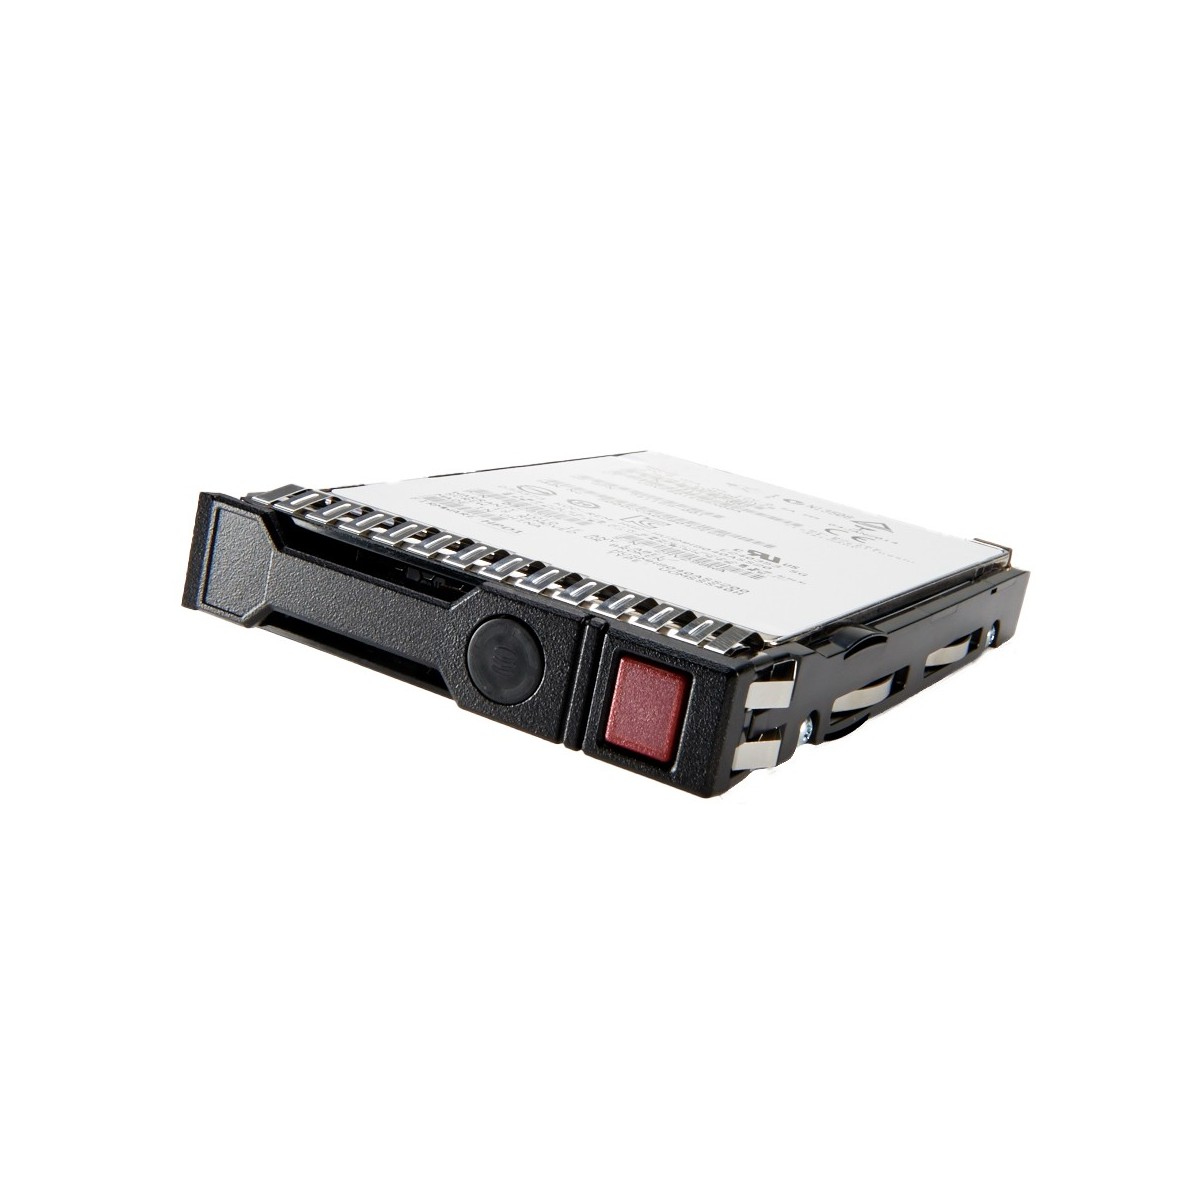 HPE 300GB SAS 2.5 inch 10 KRPM**Shipping New Sealed Spares** - Hdd - Serial Attached SCSI (SAS)